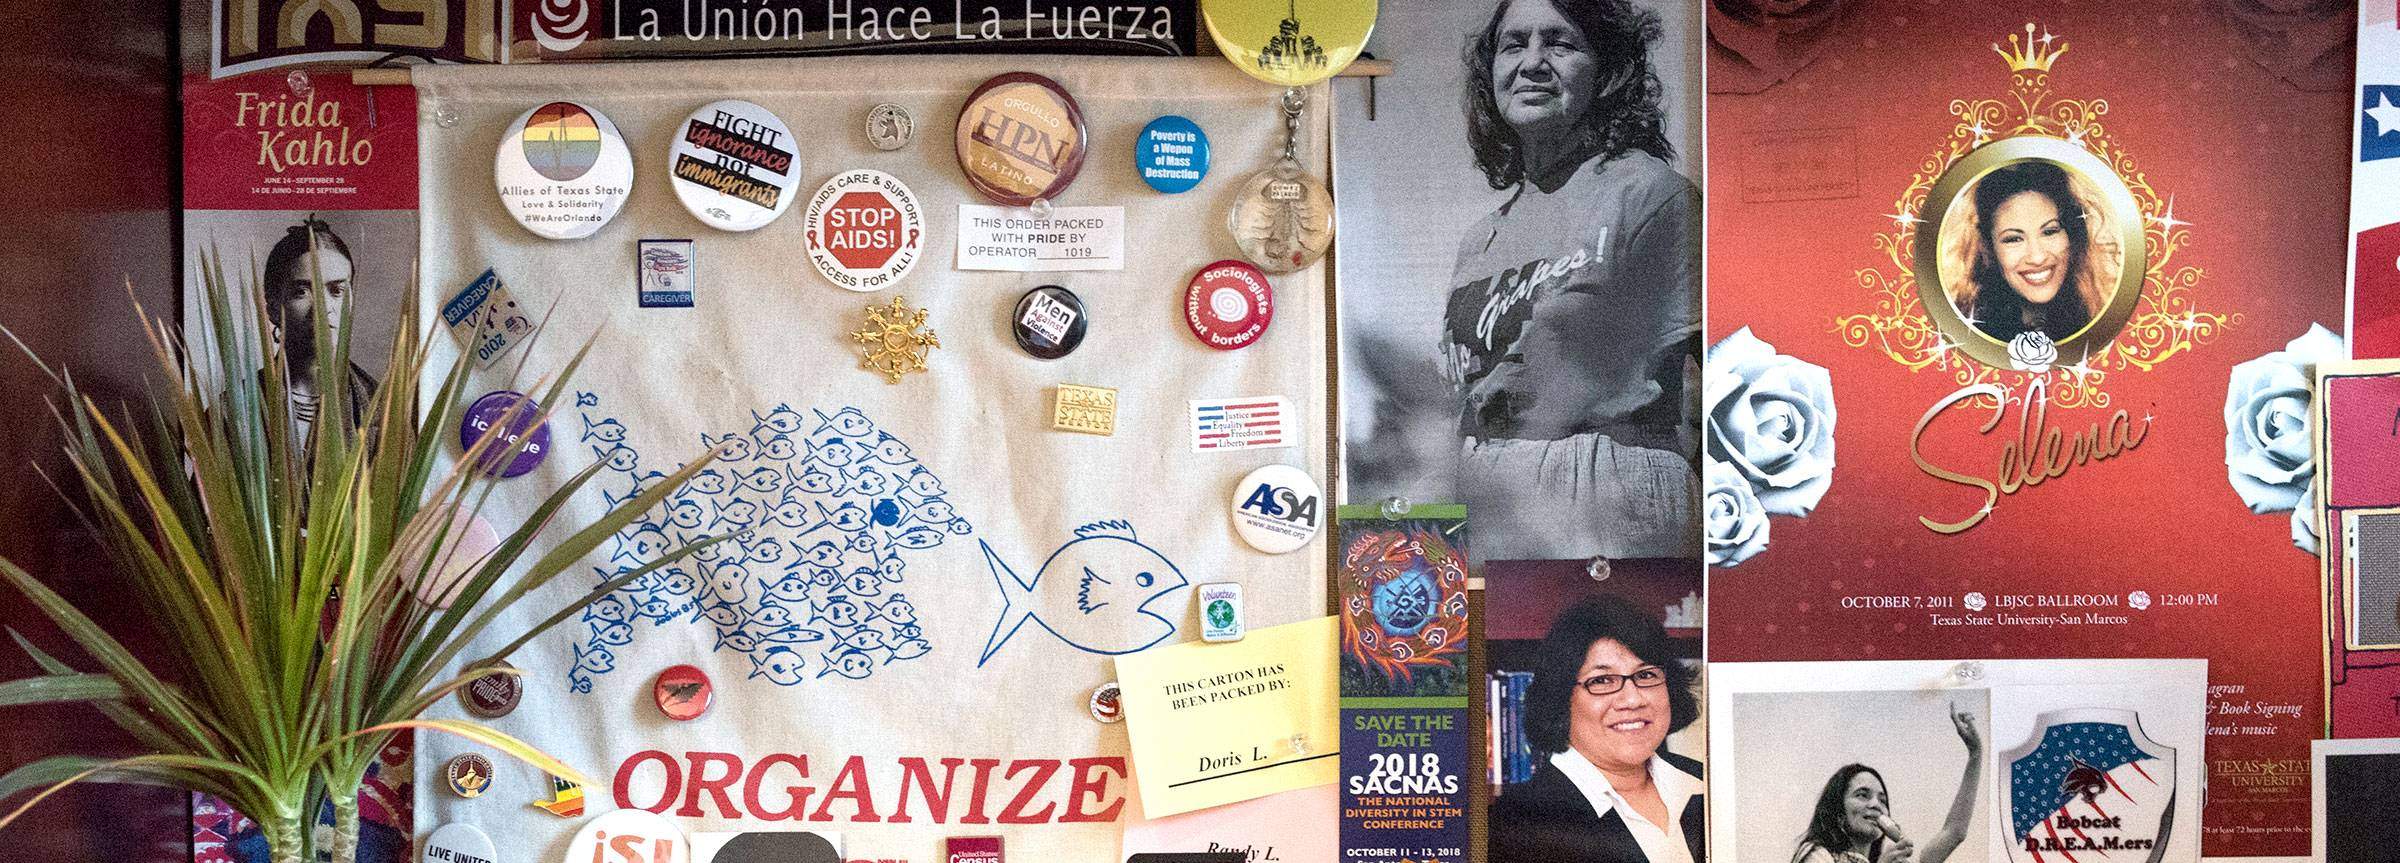 a collection of items and keepsakes related to the Latinx community including buttons and photographs